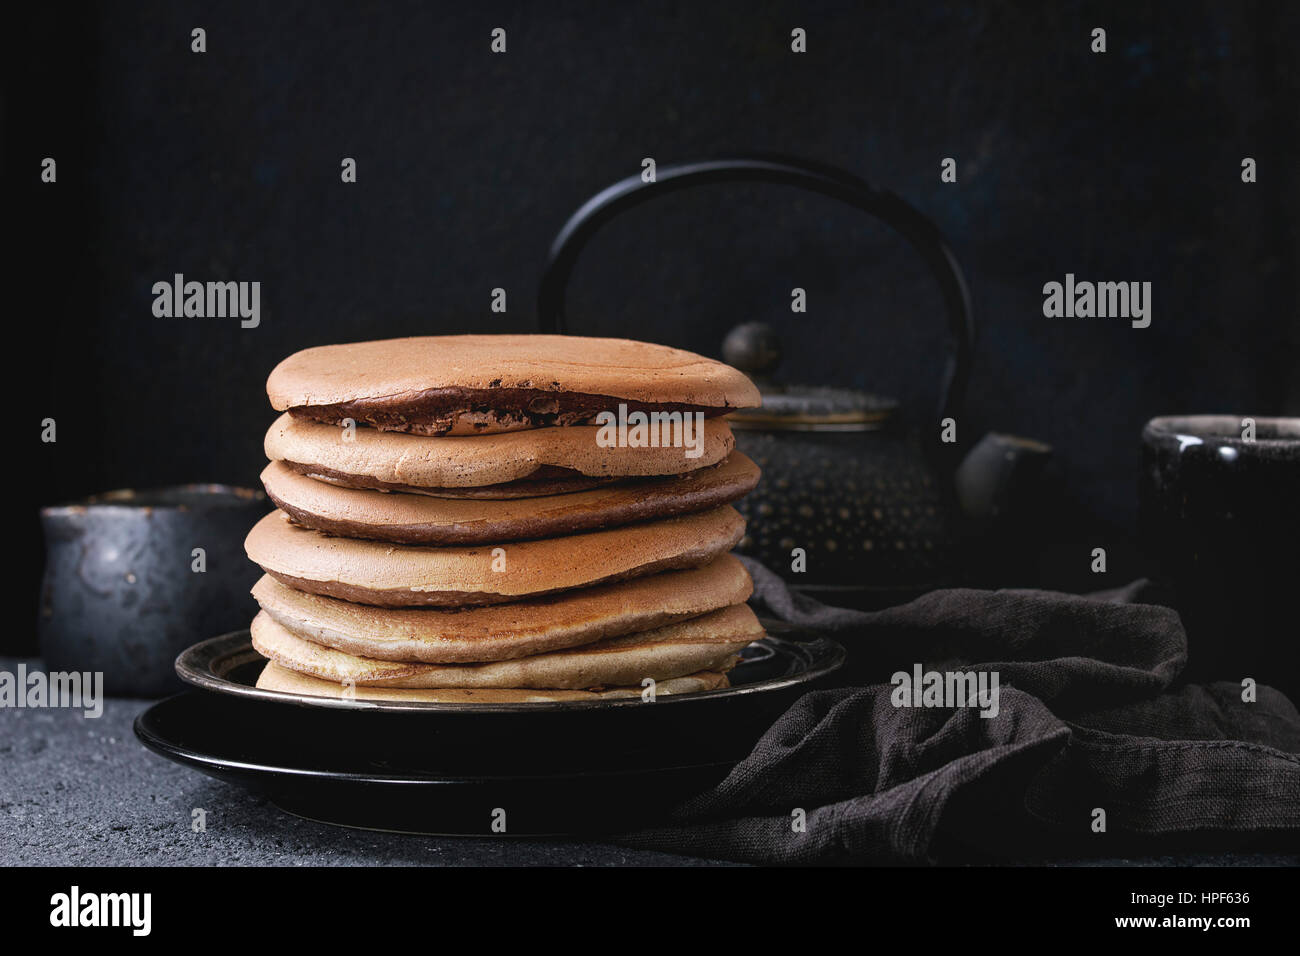 Stack of homemade american ombre chocolate pancakes served on black plate with jug of cream and teapot over black stone texture background. Stock Photo